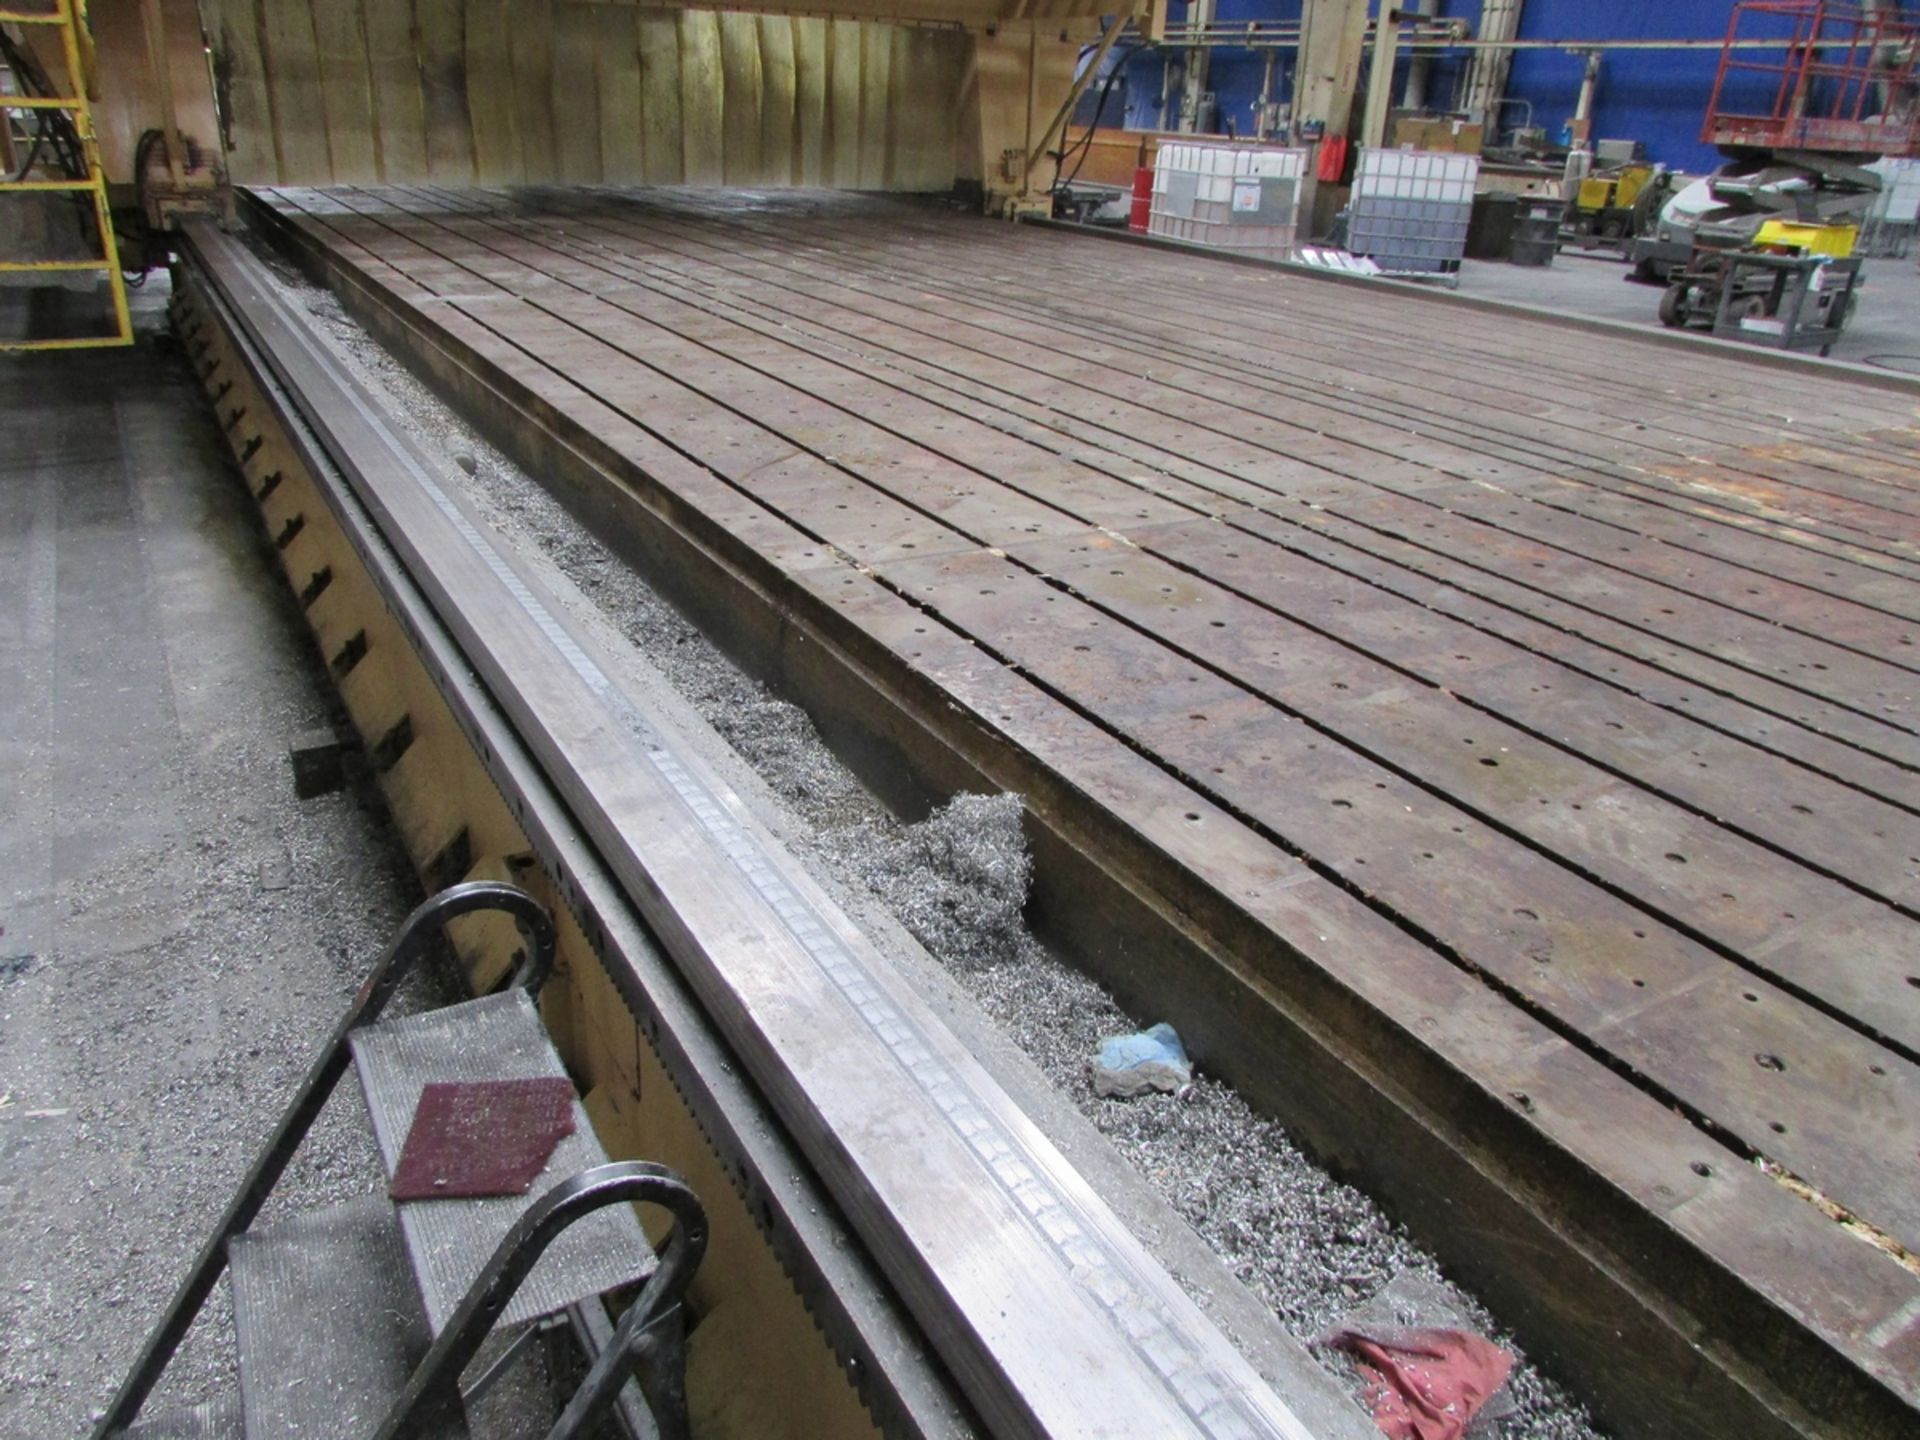 T-SLOTTED GANTRY MILL TABLE, 120' X 160", 125' BEDWAY LENGTH - Image 14 of 18